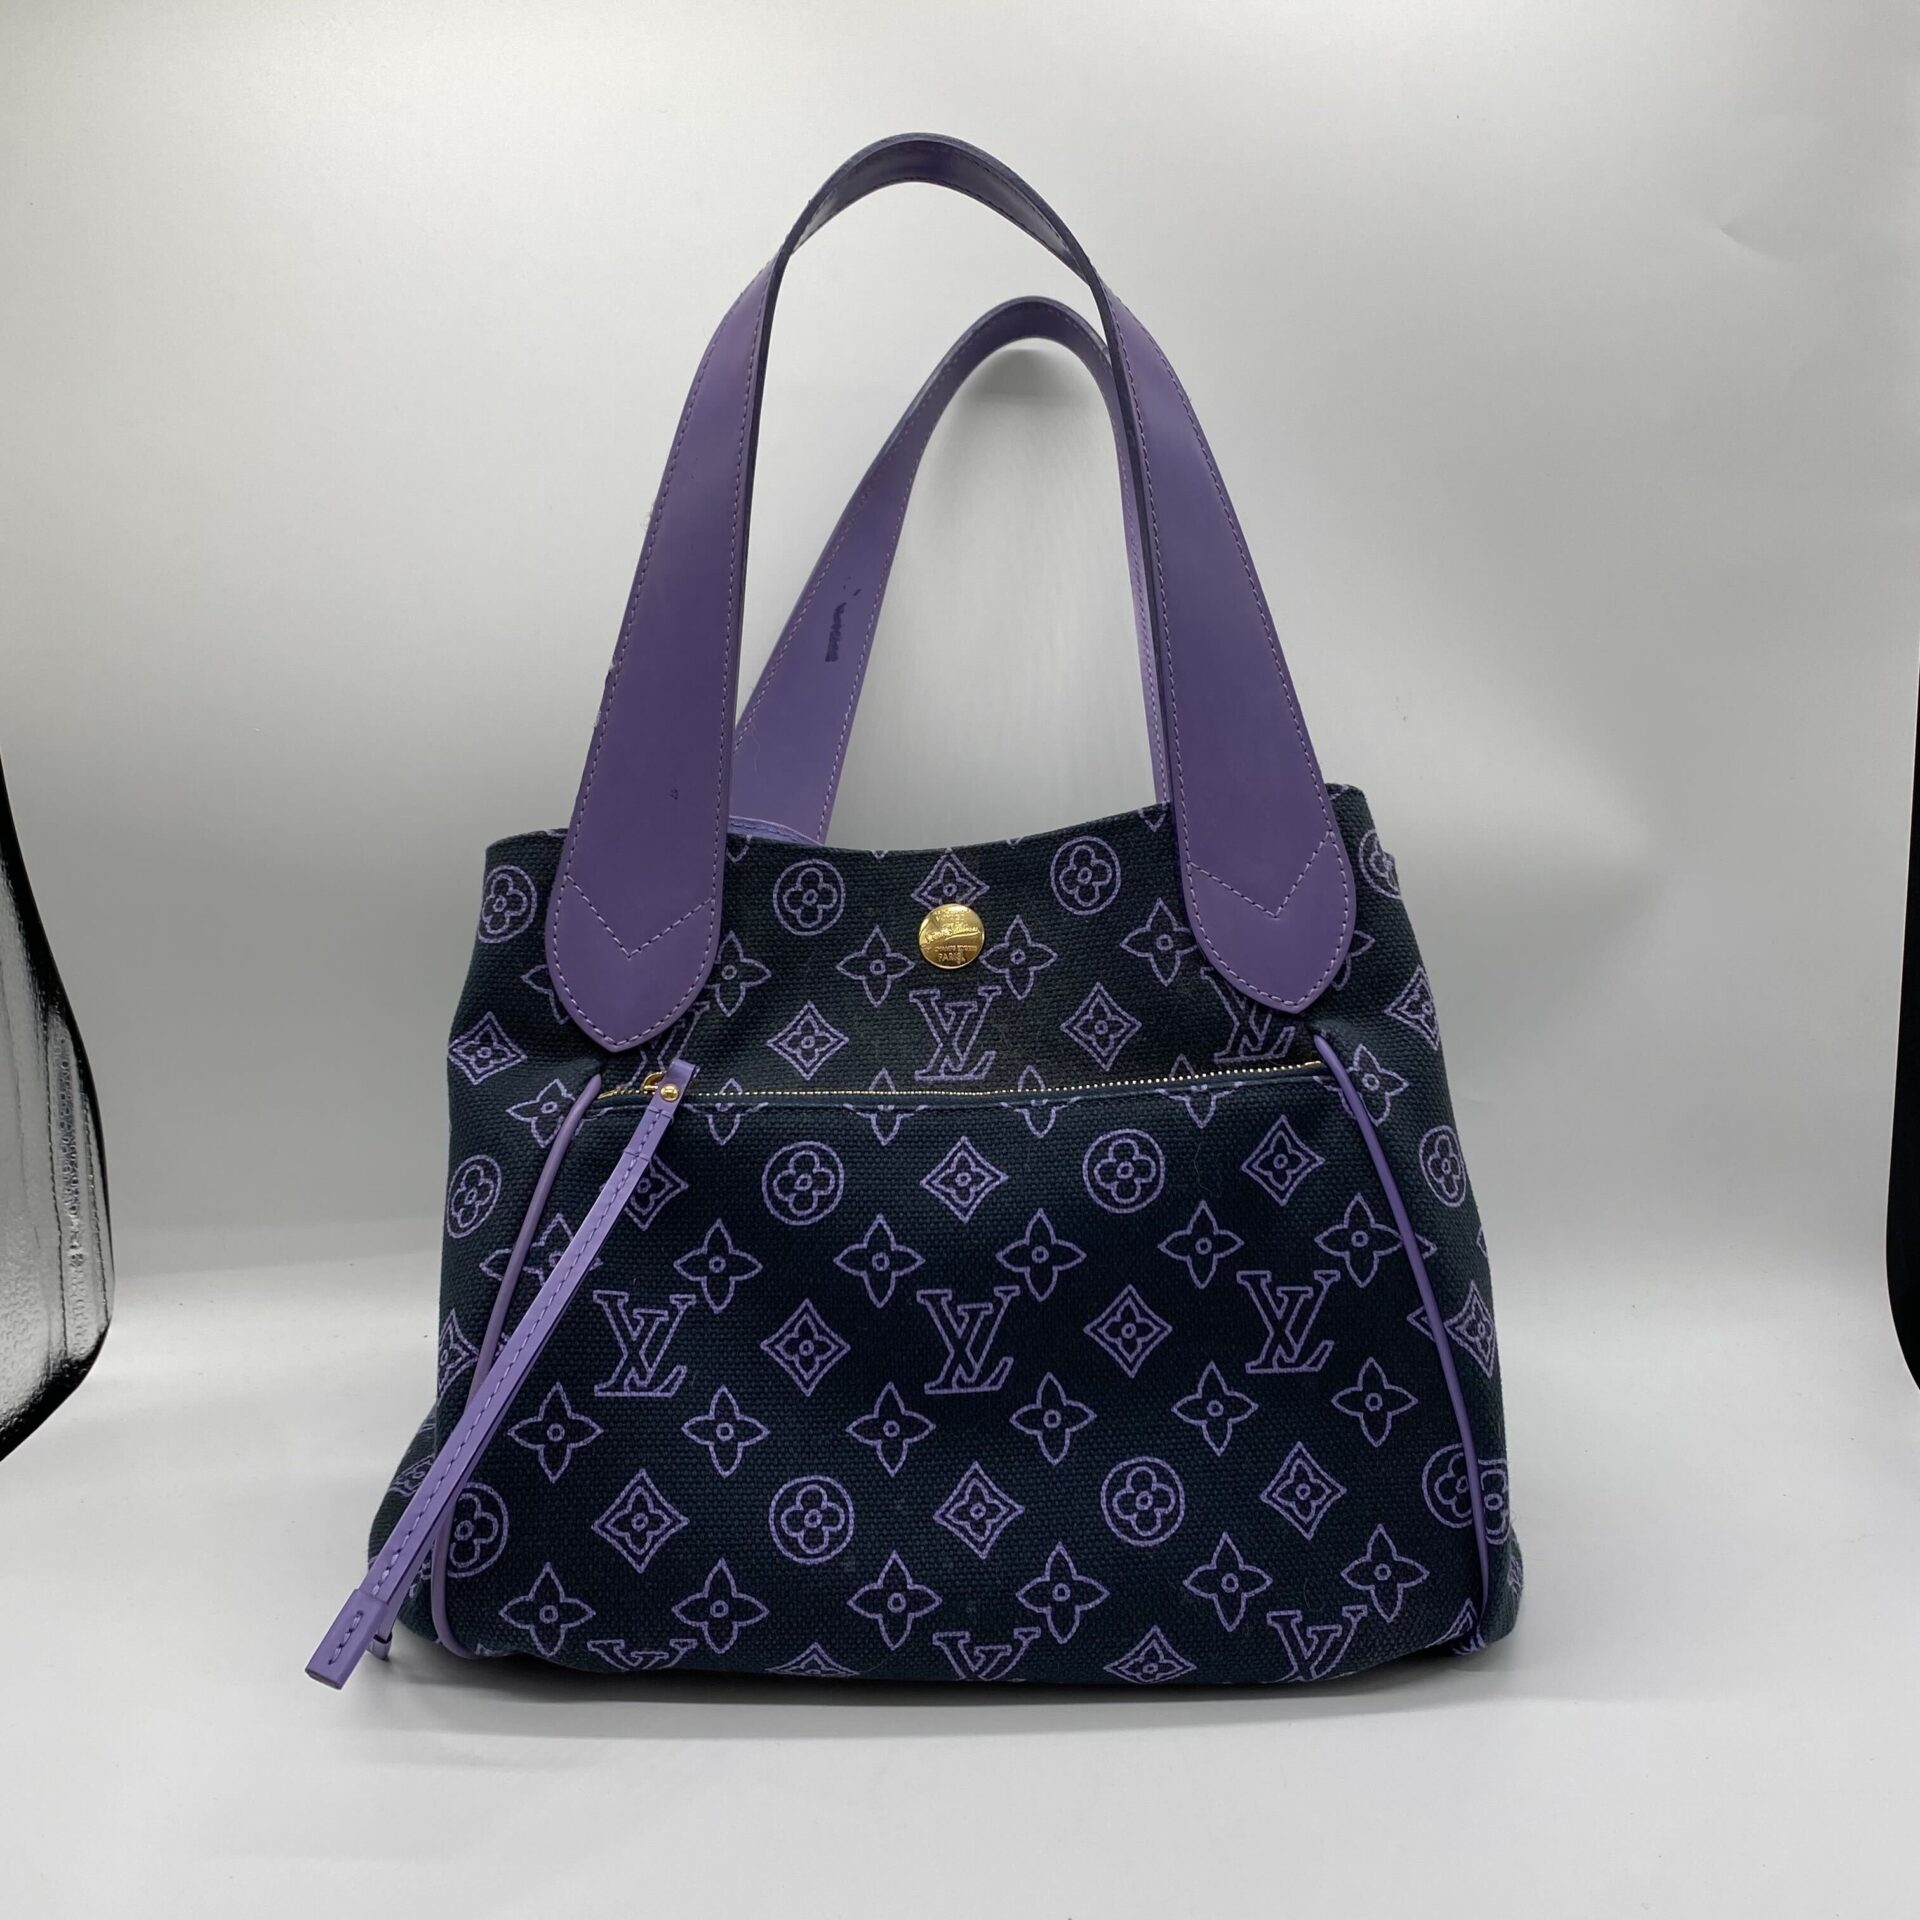 LV カバイパネマPM トートバッグ